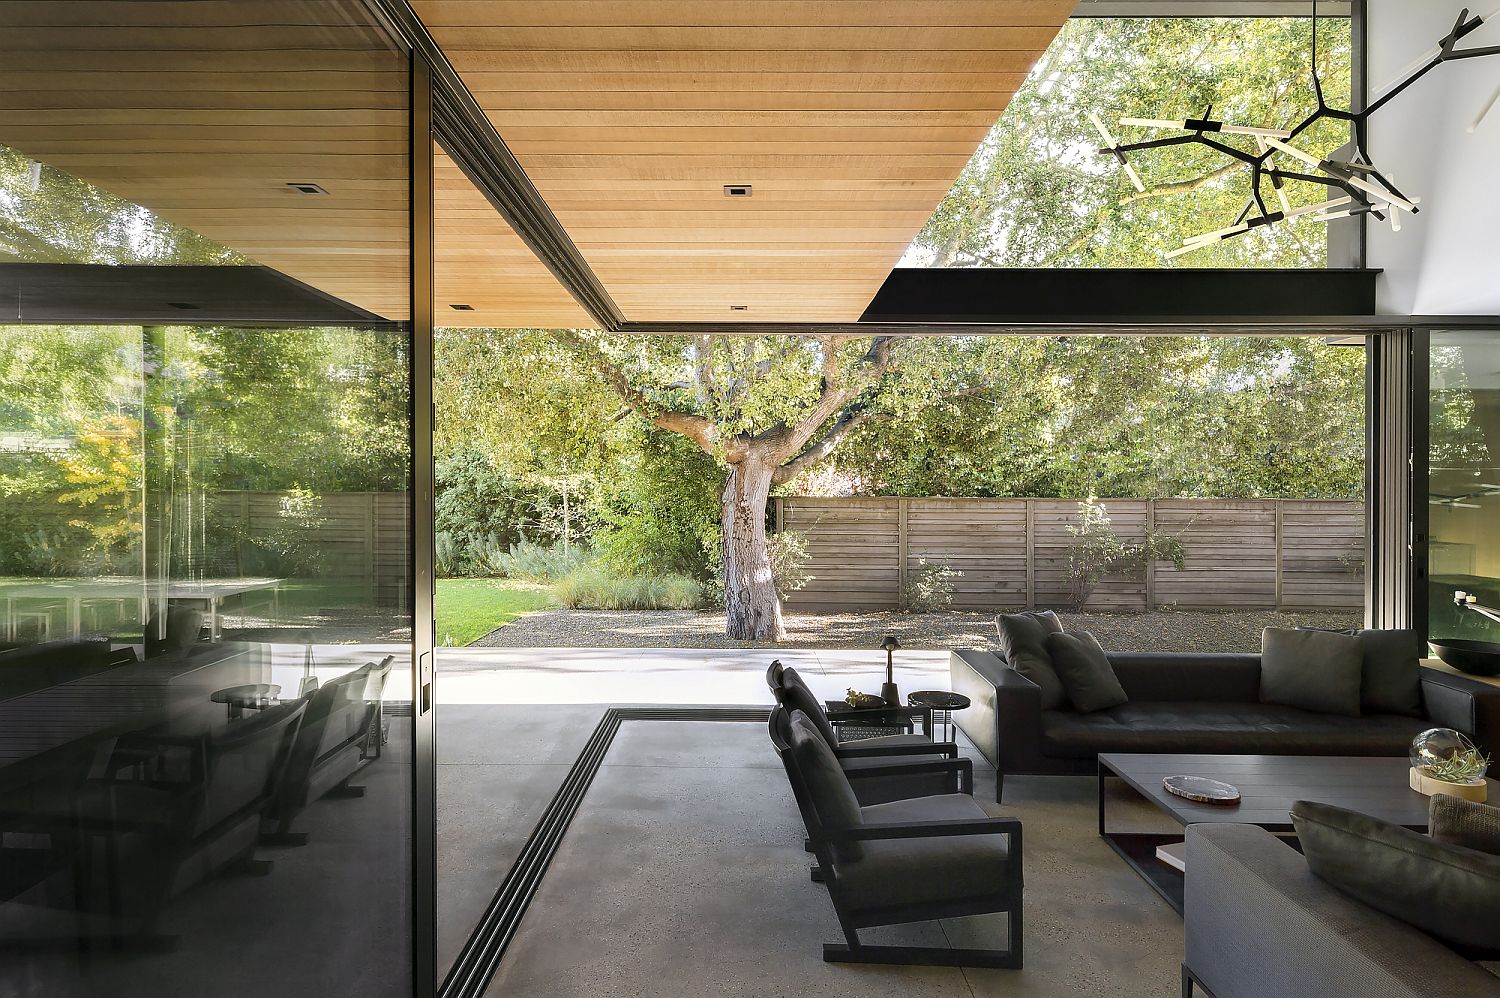 Sliding glass doors connect the living area with the landscape